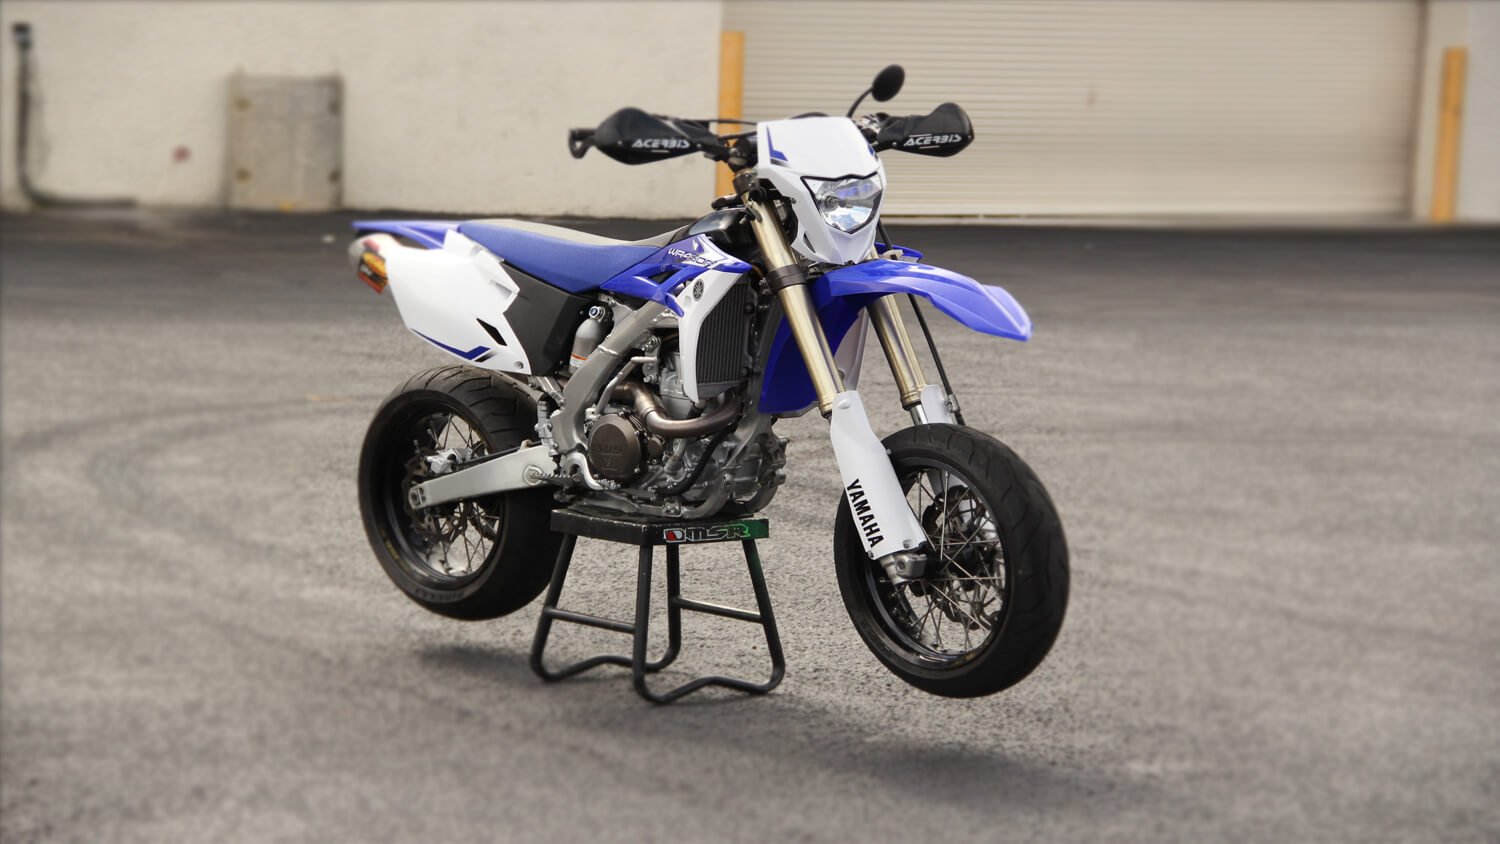 How to make a dirt bike street legal in wisconsin 7 Things You Want In A Street Legal Dirt Bike And 4 You Don T